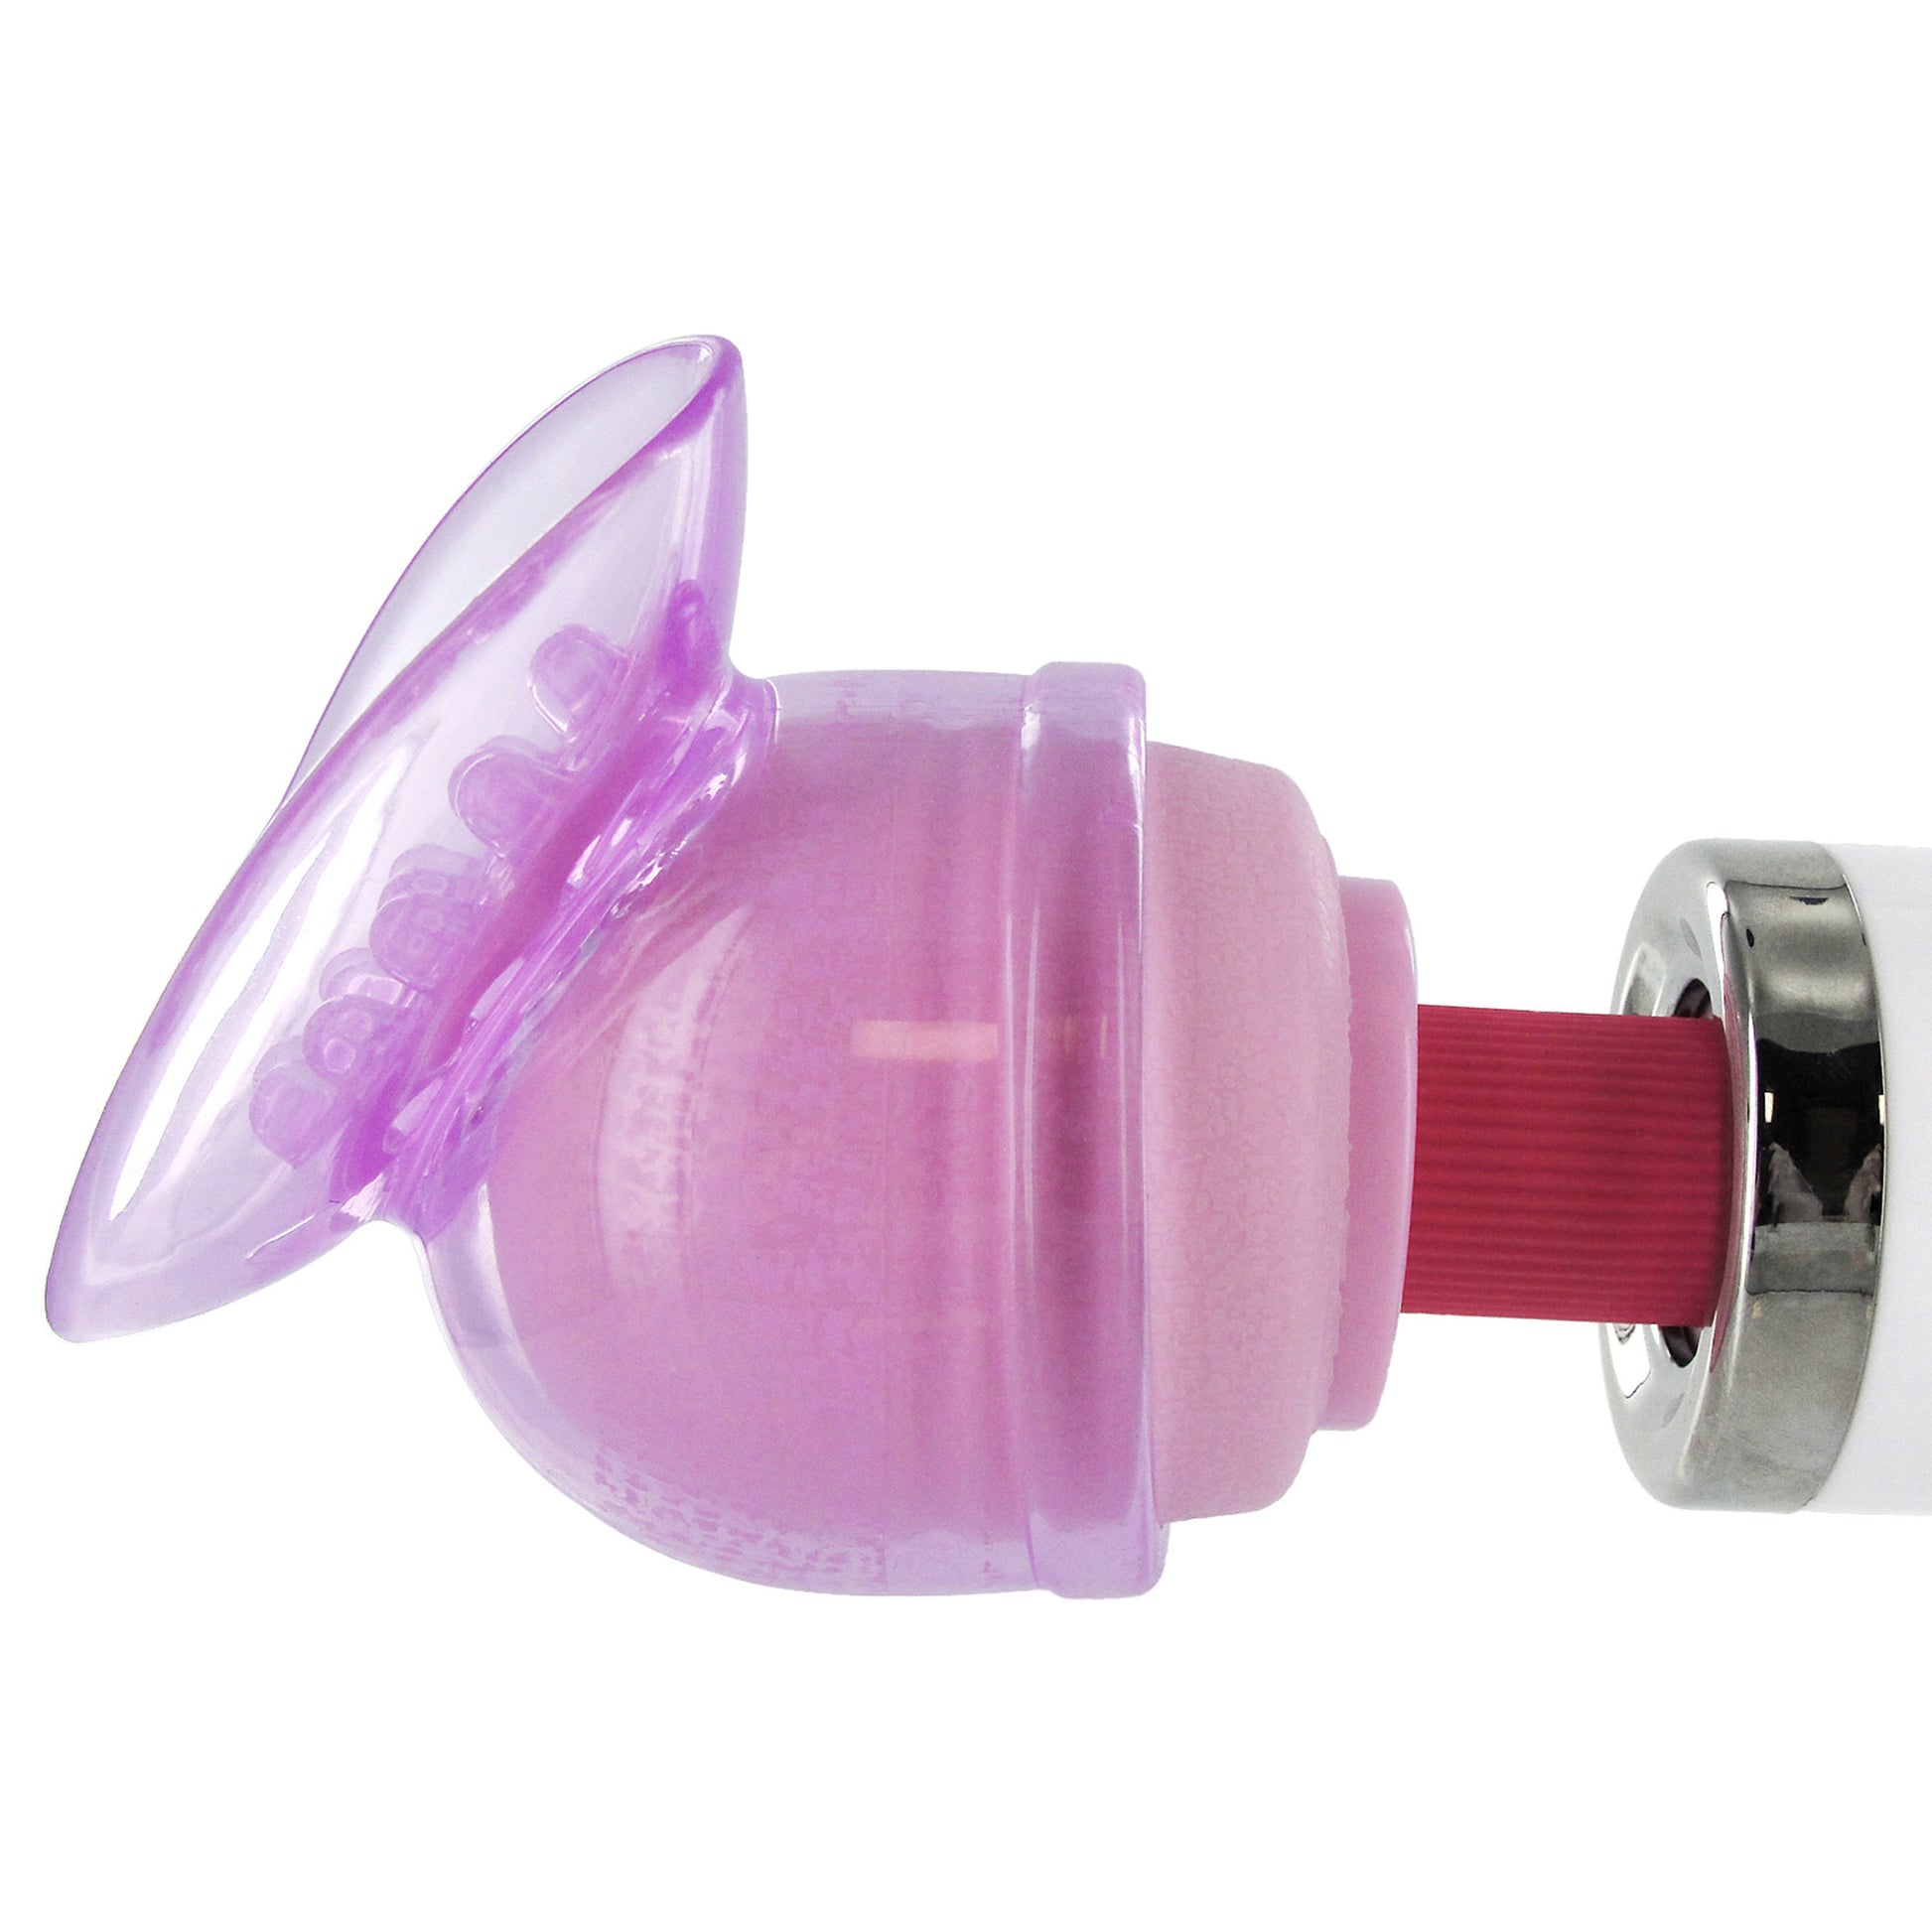 Lily Pod Wand Attachment - Boxed - UABDSM